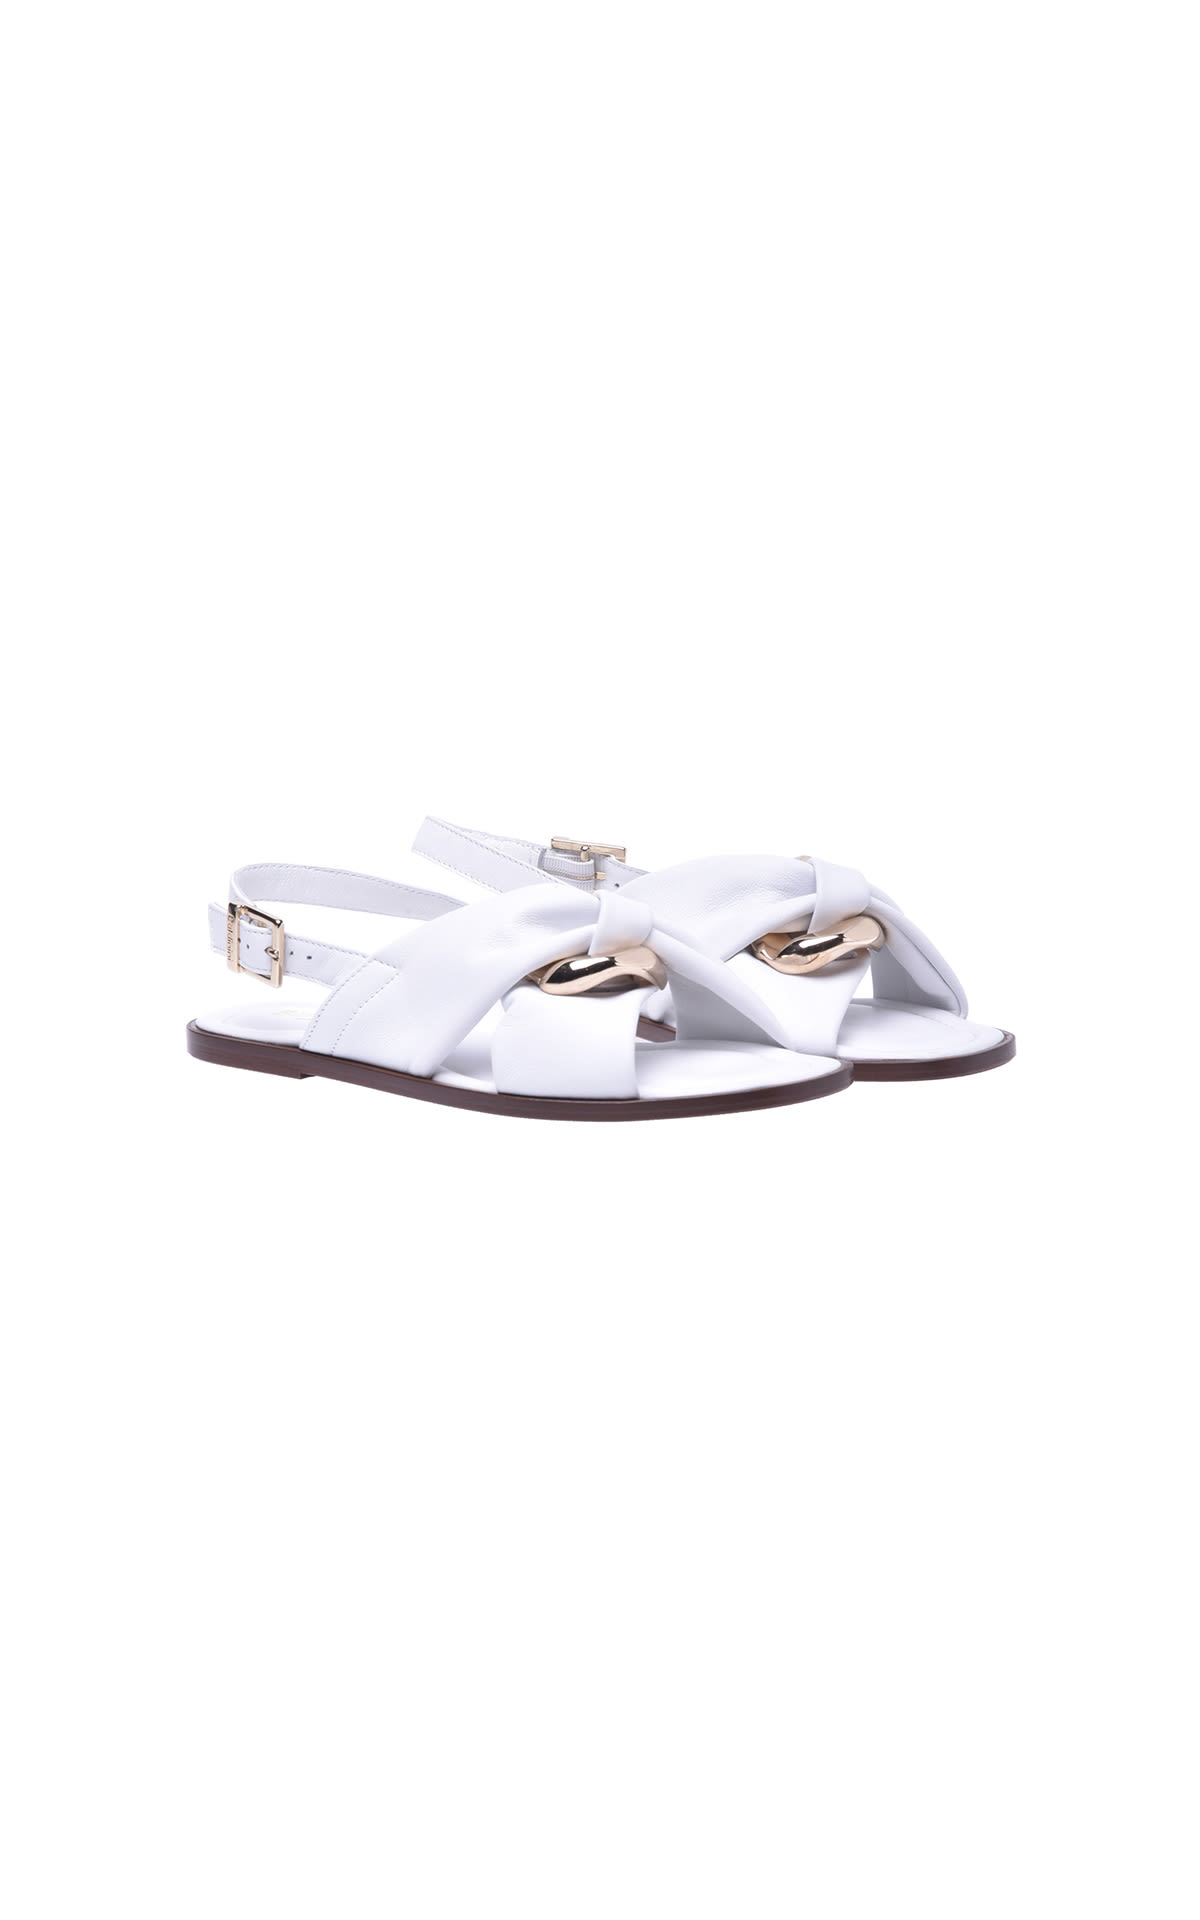 White sandal with gold details